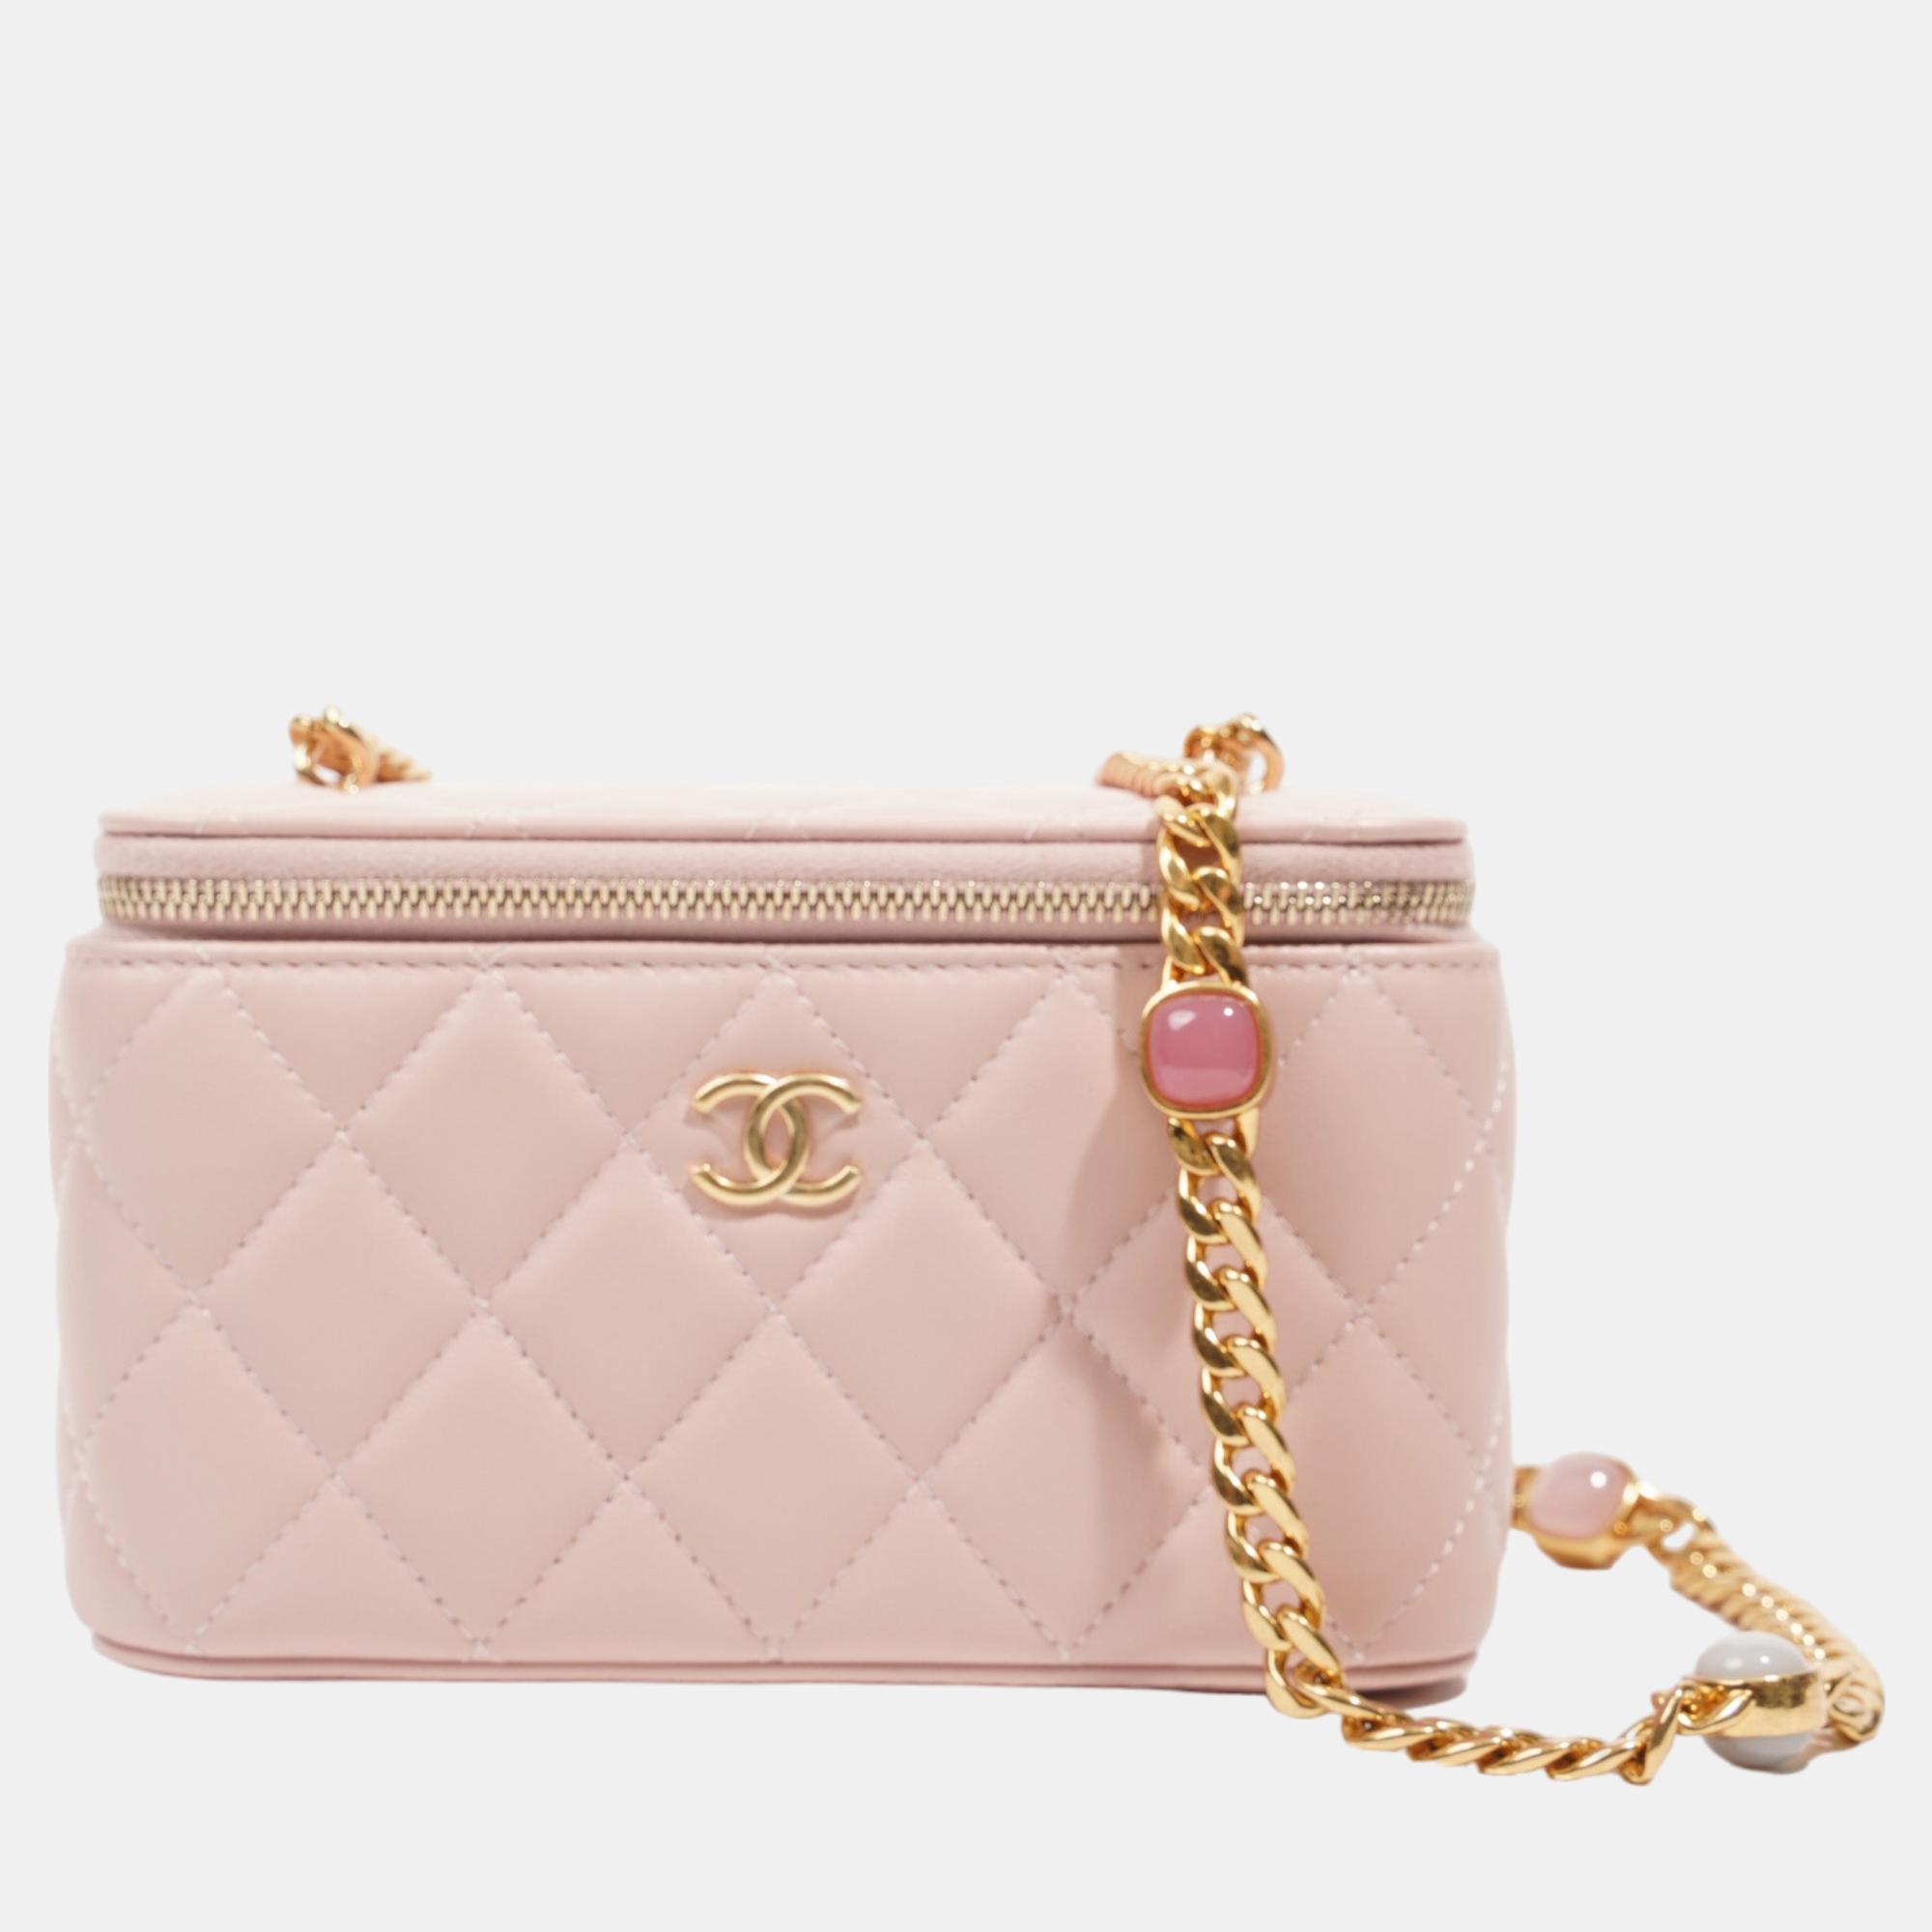 Chanel Womens Vanity Case With Jewel Chain